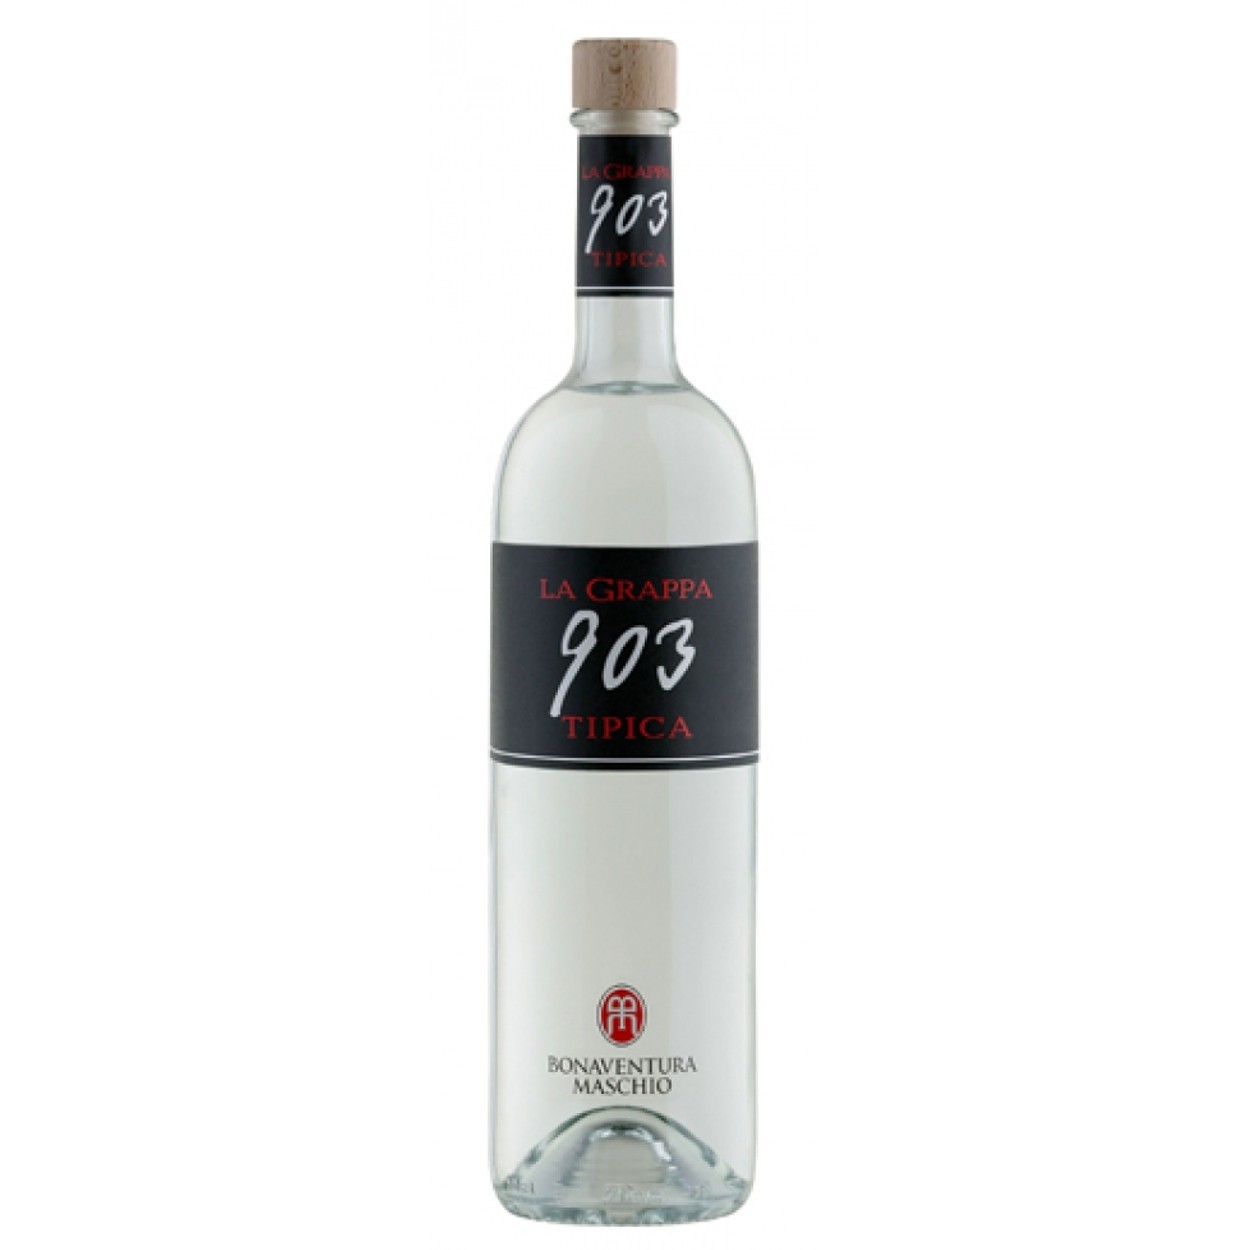 Grappa 903 Typical